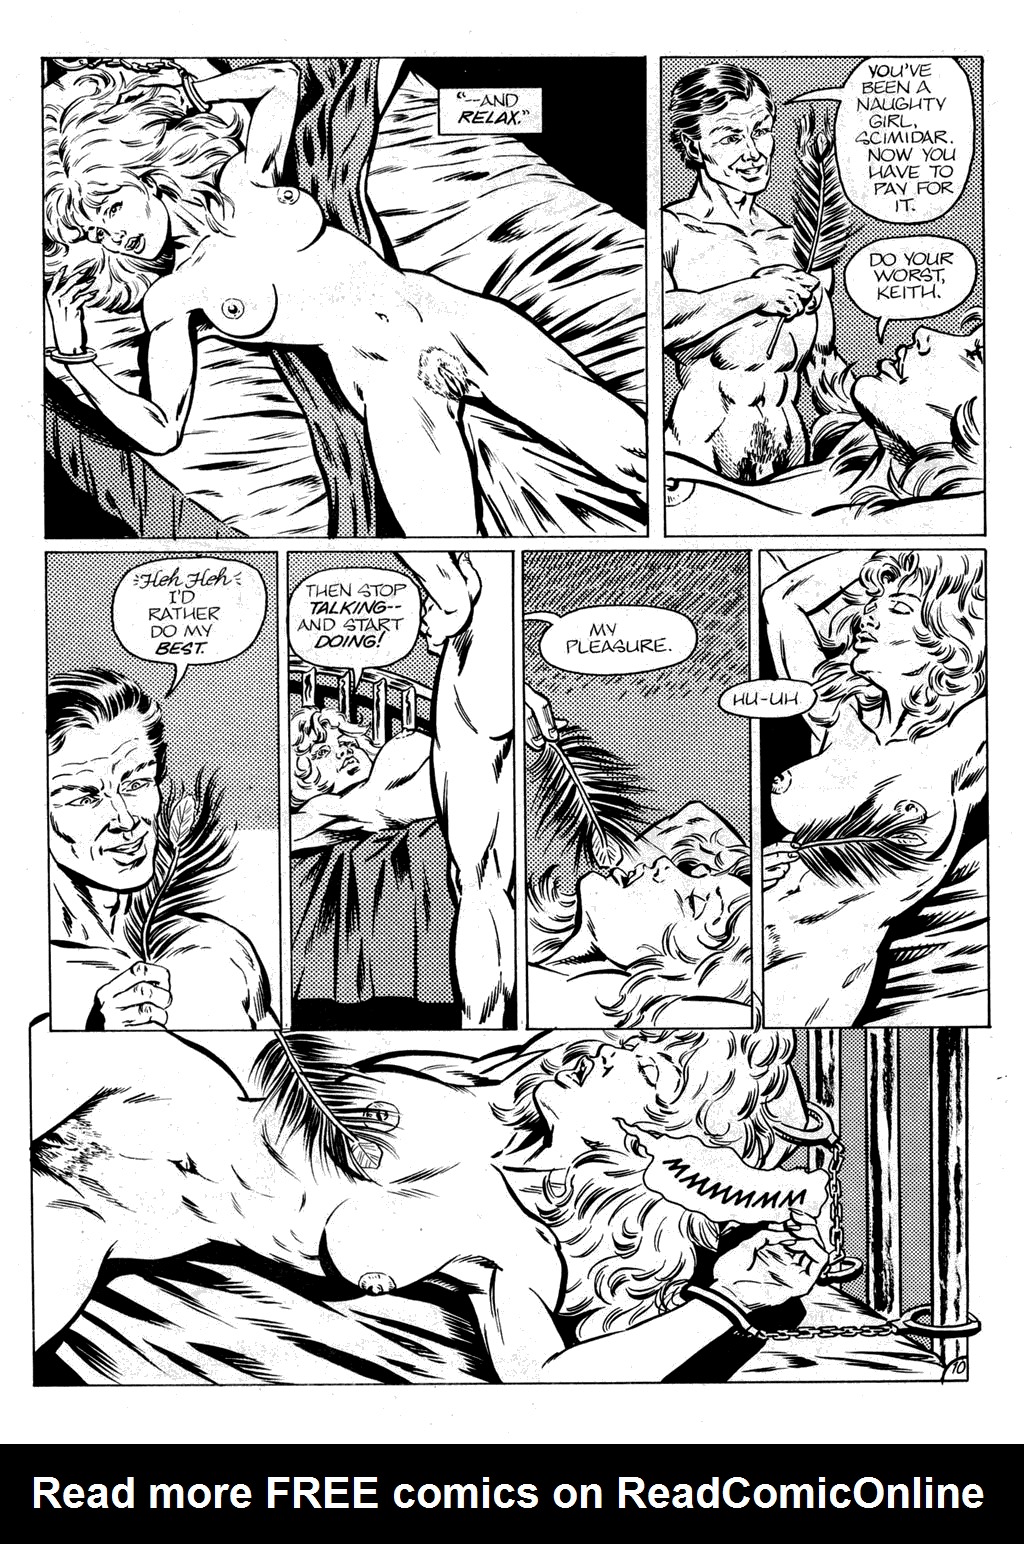 Scimidar Book IV: Wild Thing issue 1 - Page 11